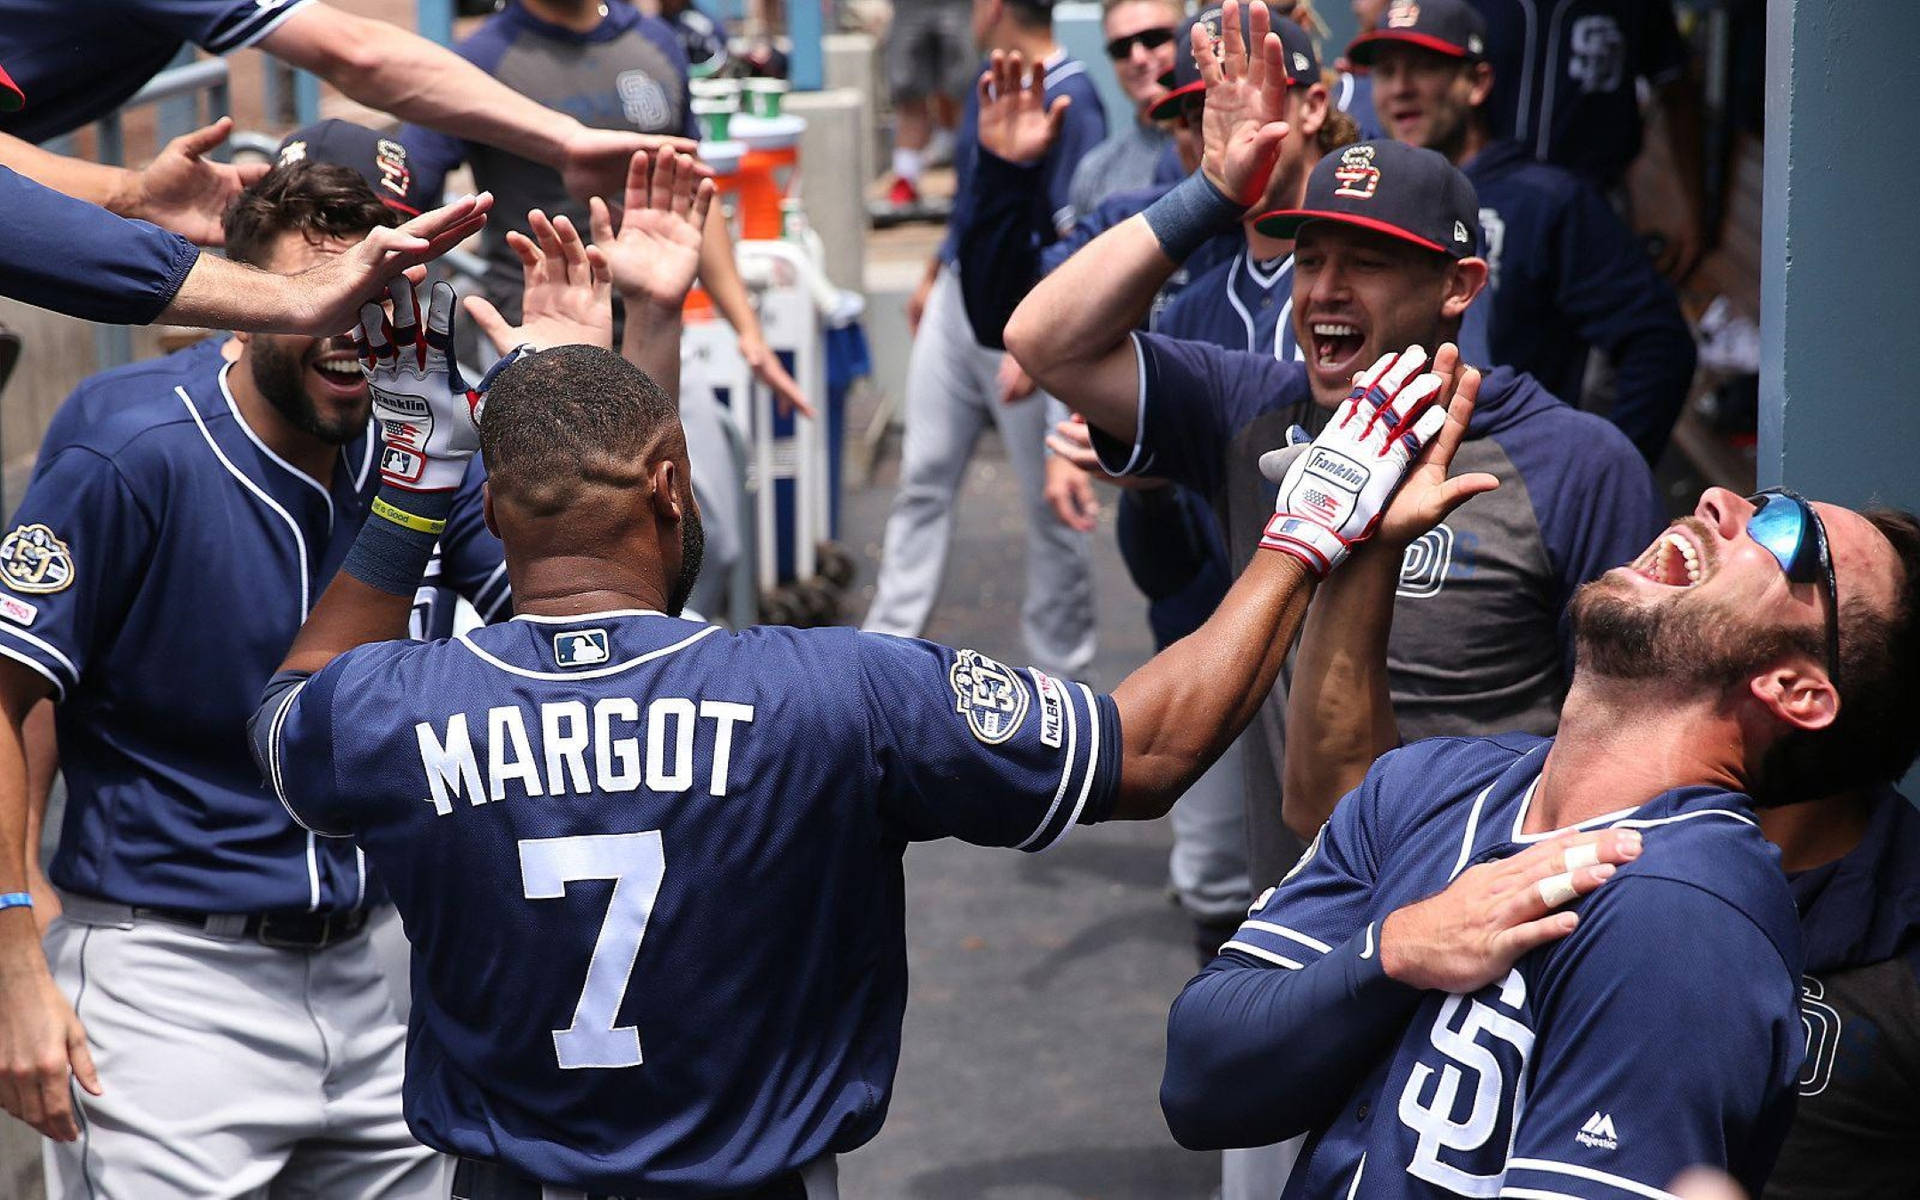 San Diego Padres Cheer For Margot